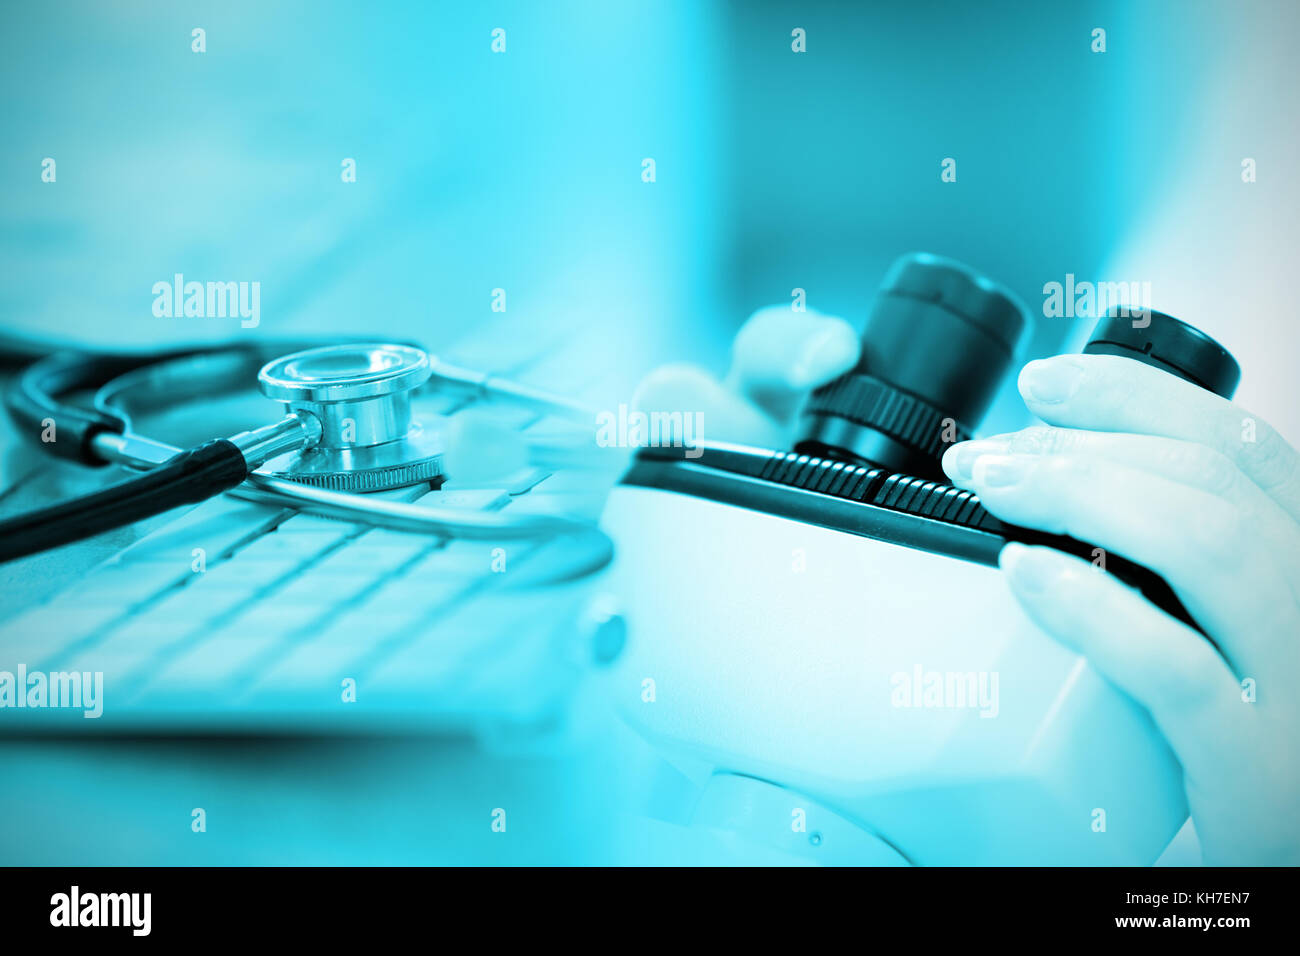 Close-up of keyboard with stethoscope against close up of a female scientist looking through a microscope Stock Photo